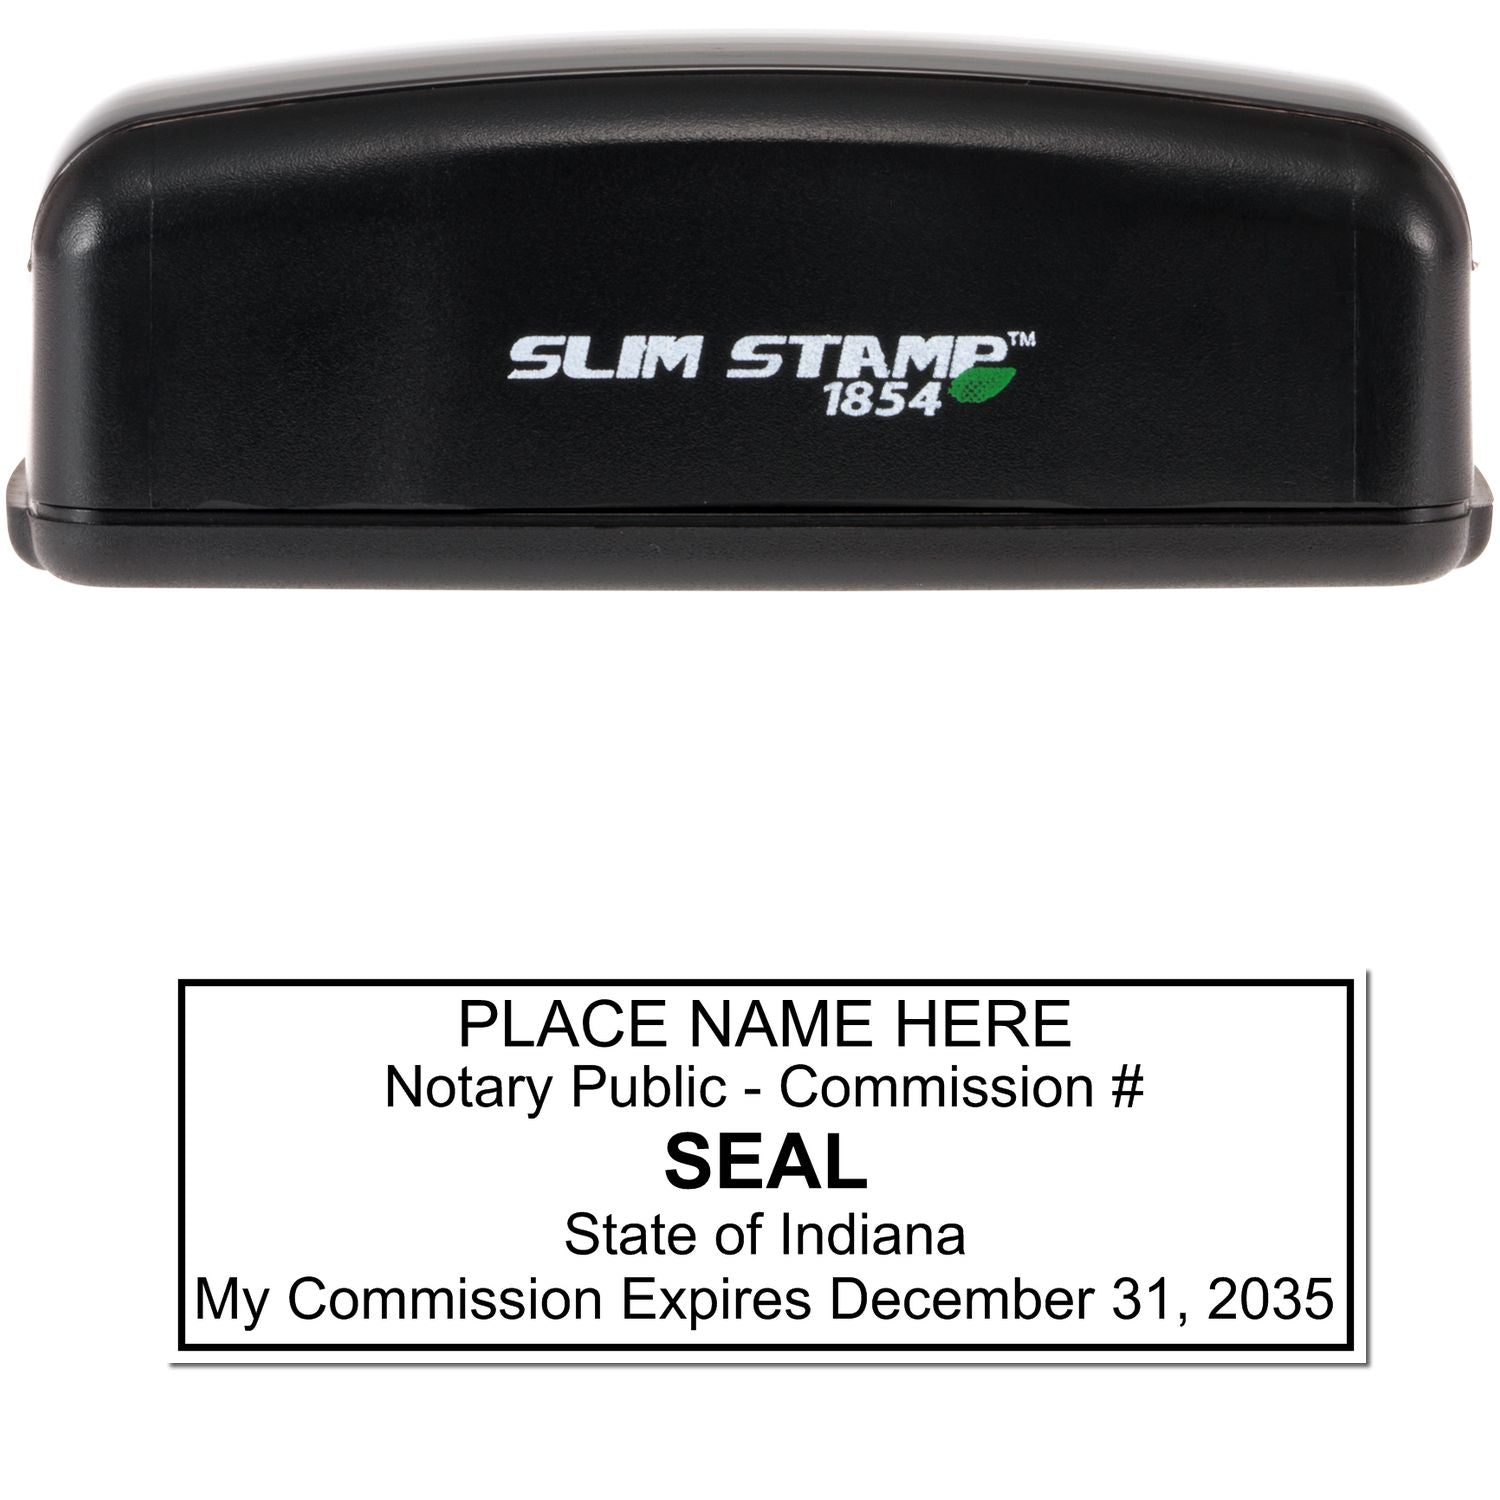 The main image for the Slim Pre-Inked Rectangular Notary Stamp for Indiana depicting a sample of the imprint and electronic files